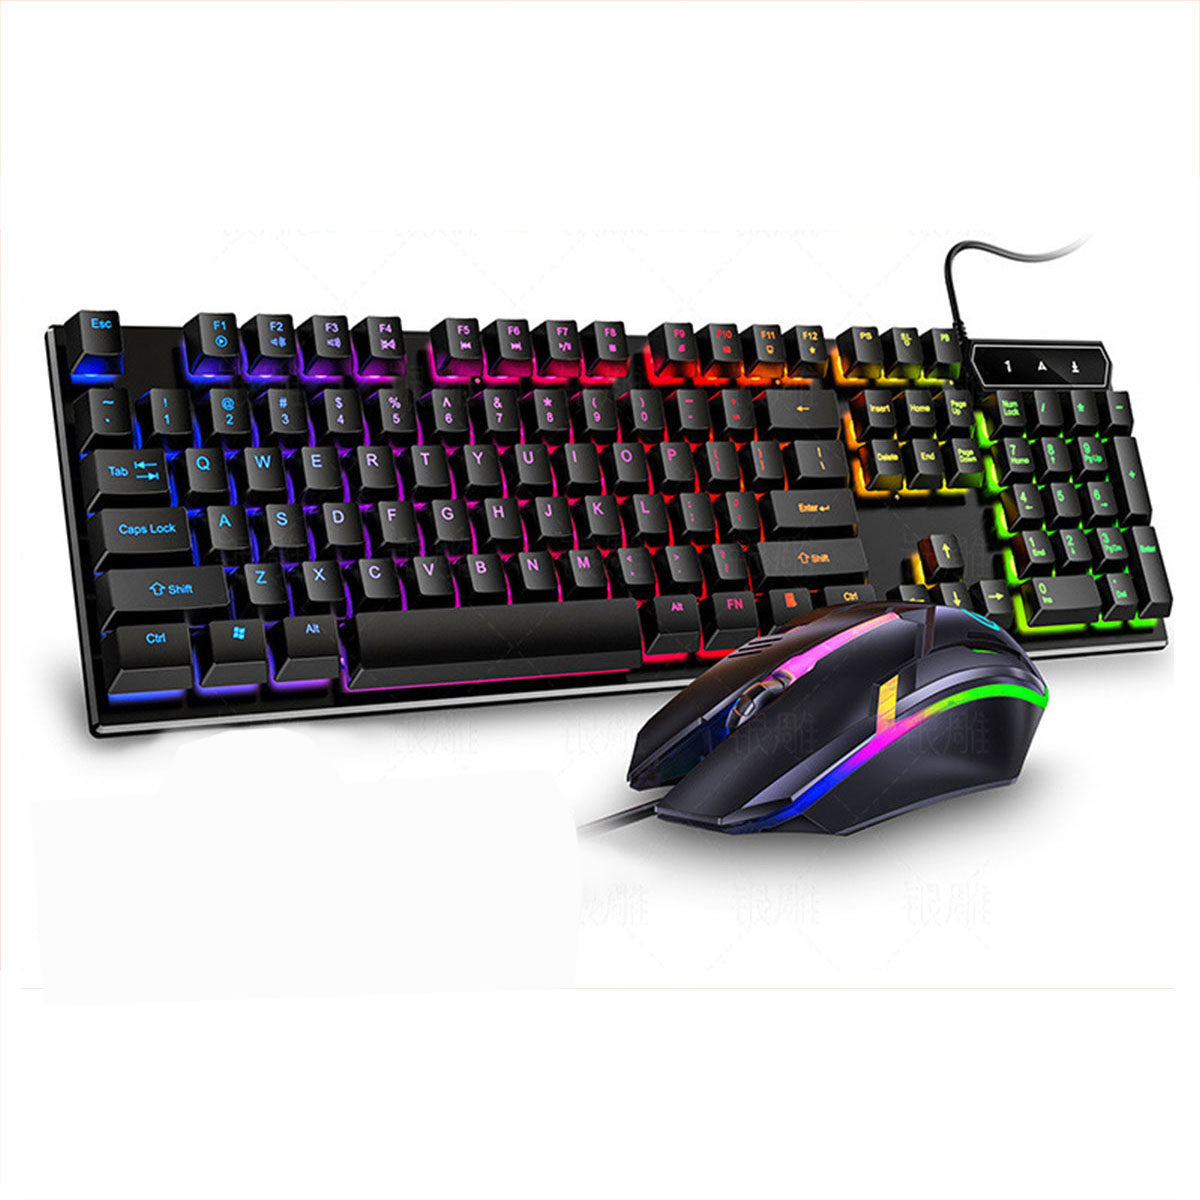 YINDIAO VG46 Wired Mechanical  Keyboard & Mouse Set 104 Keys Gaming Keyboard Ergonomic Mouse Combo Home Office Kit for Laptop Computer PC